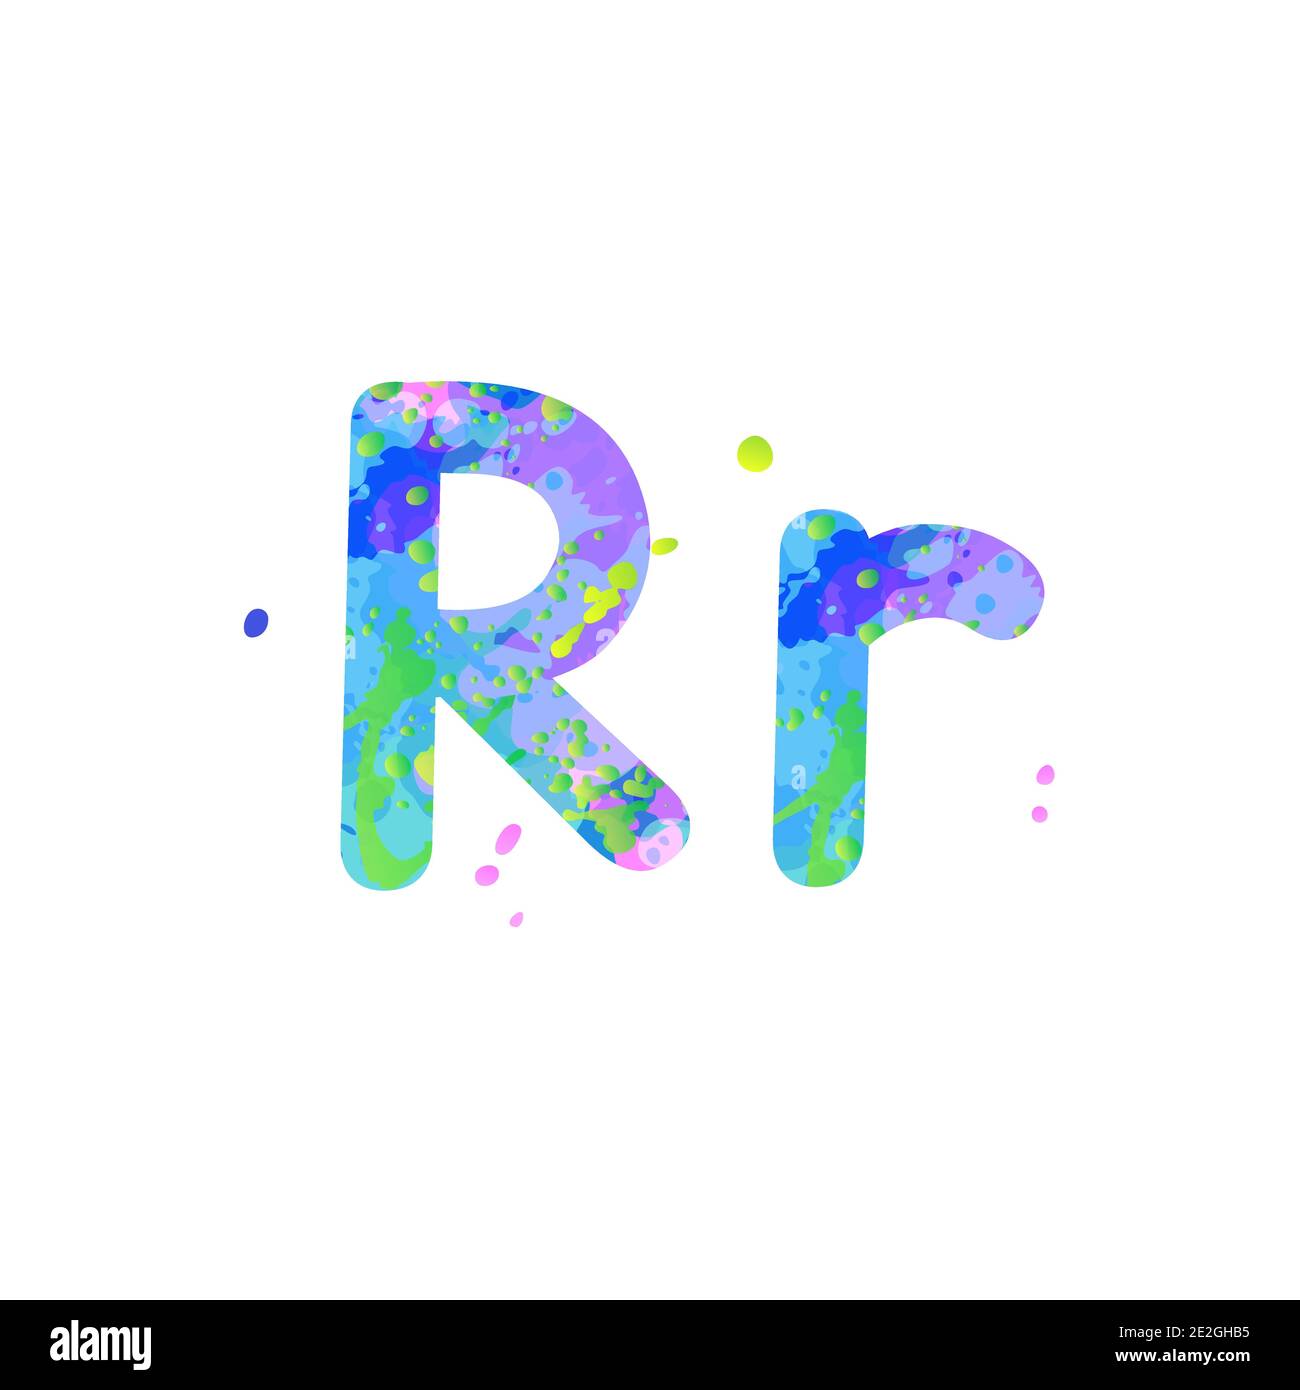 Letters R uppercase and lowercase with effect of liquid spots of paint in blue, green, pink colors, isolated on white background. Decoration element for design of a flyer, poster, cover, title. Vector Stock Vector